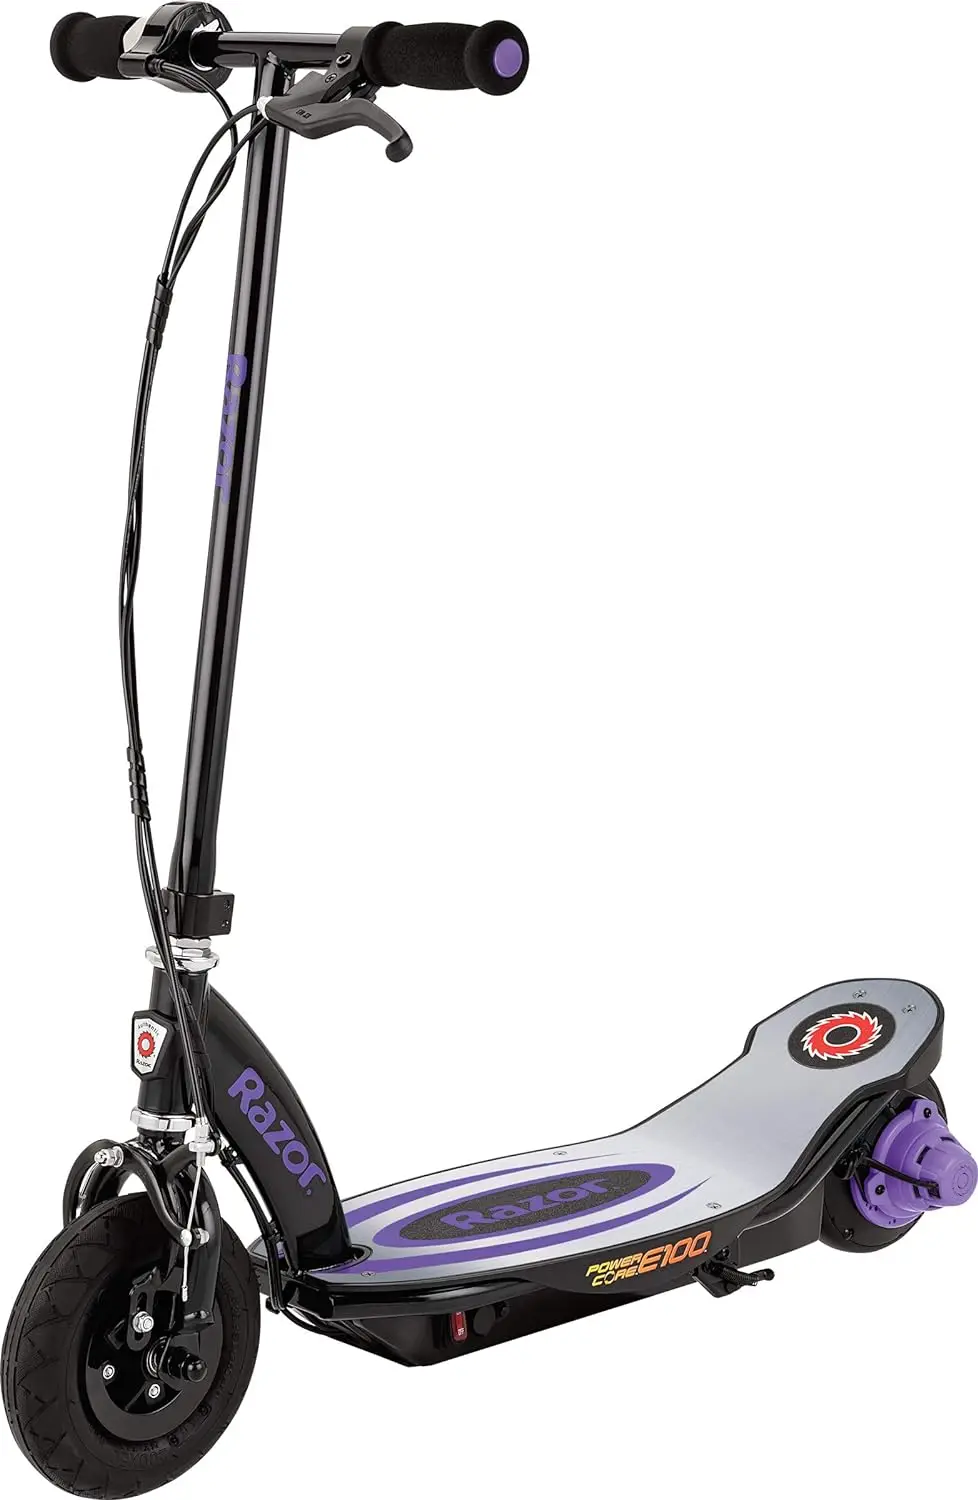 

E100 Scooter for Kids Ages 8+ - 100w Hub Motor, 8" Pneumatic Tire, Up to 11 mph and 60 min Ride Time, For Riders up to 120 to